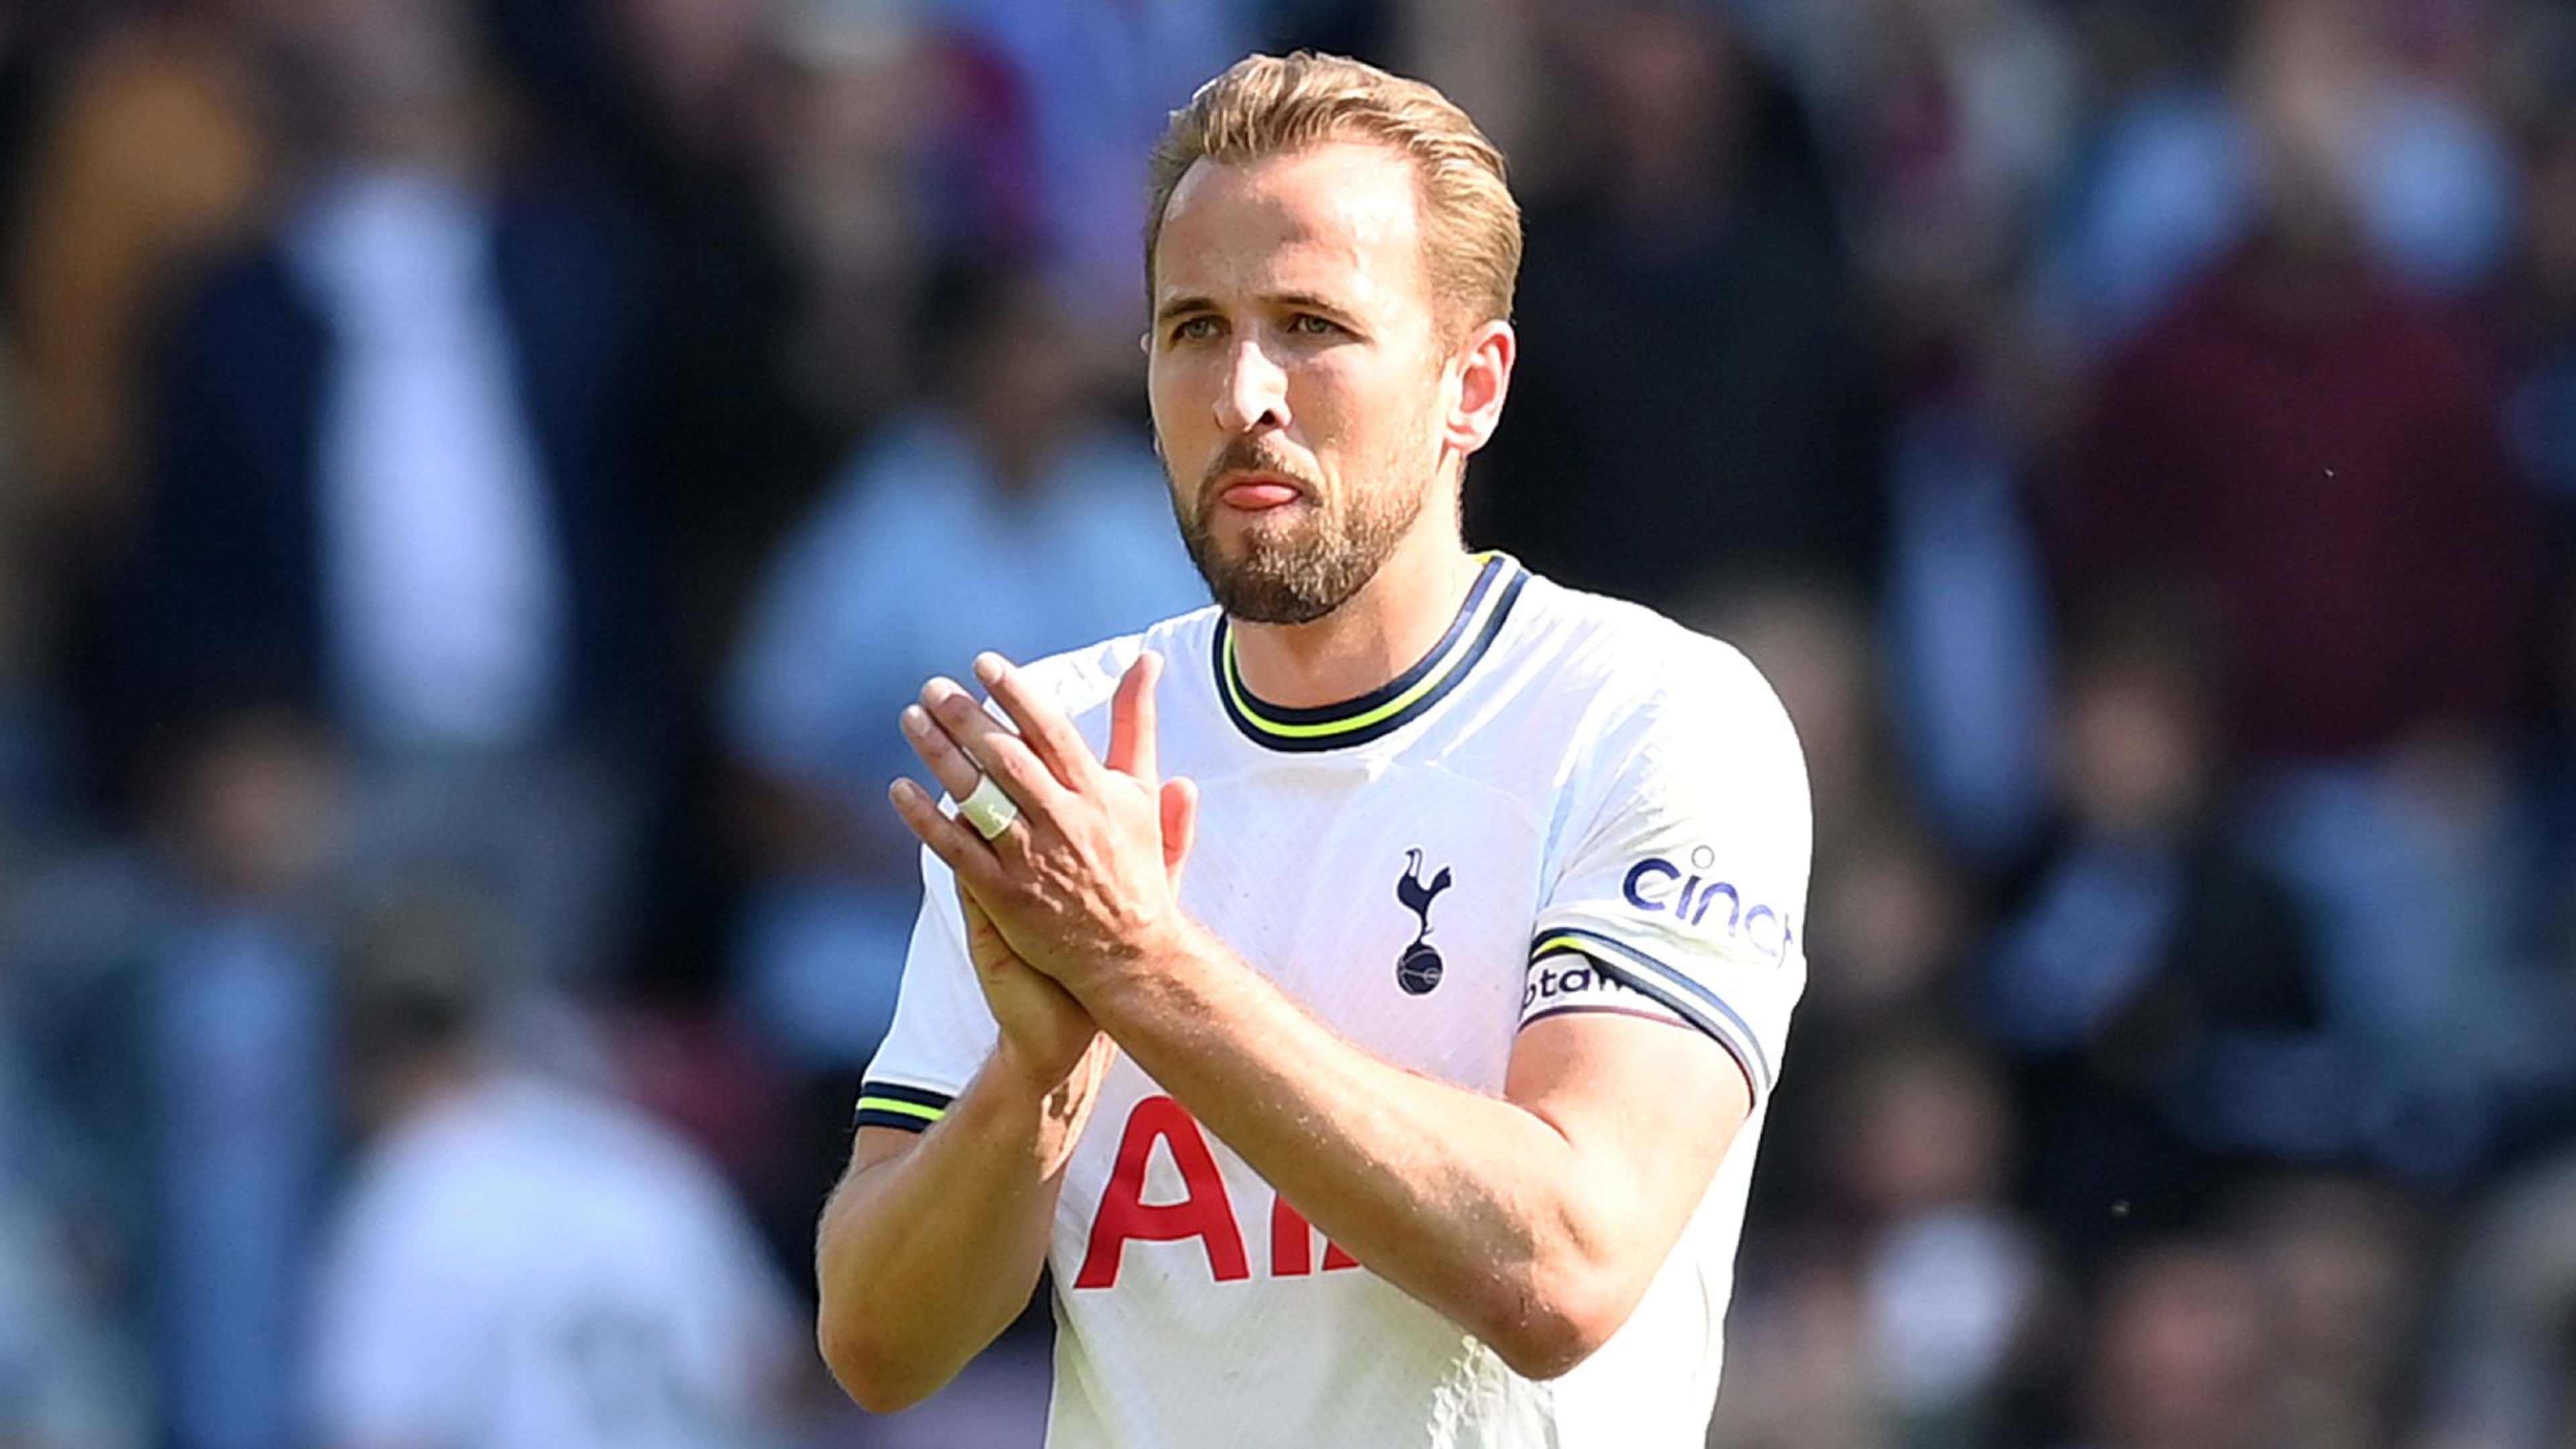 Transfer blow for Man Utd? Harry Kane hints he could stay at